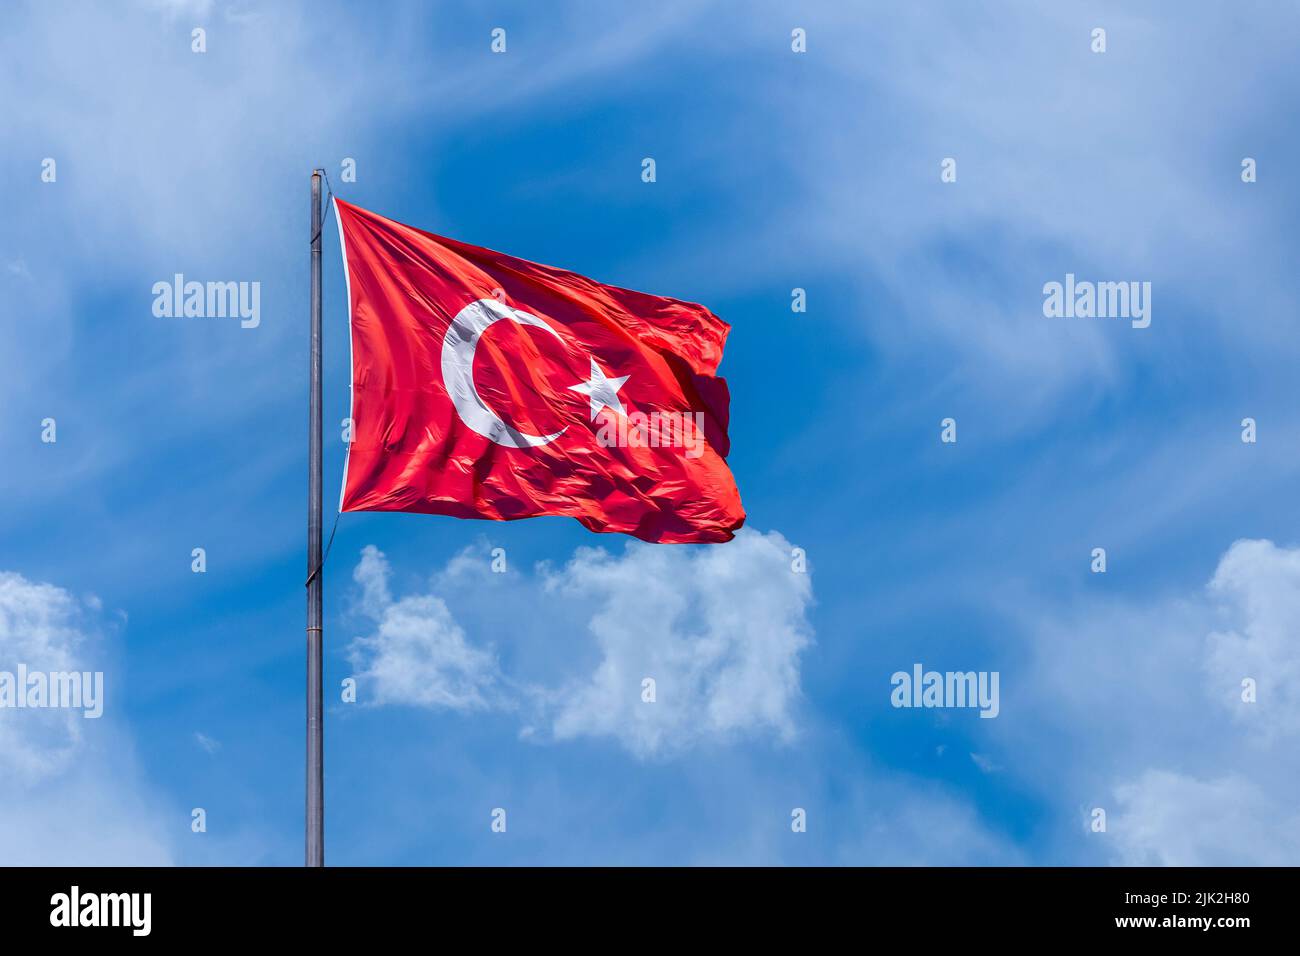 The Turkish flag is the national and official flag of the Republic of Turkey. It consists of a white crescent moon and star on a red background. It wa Stock Photo